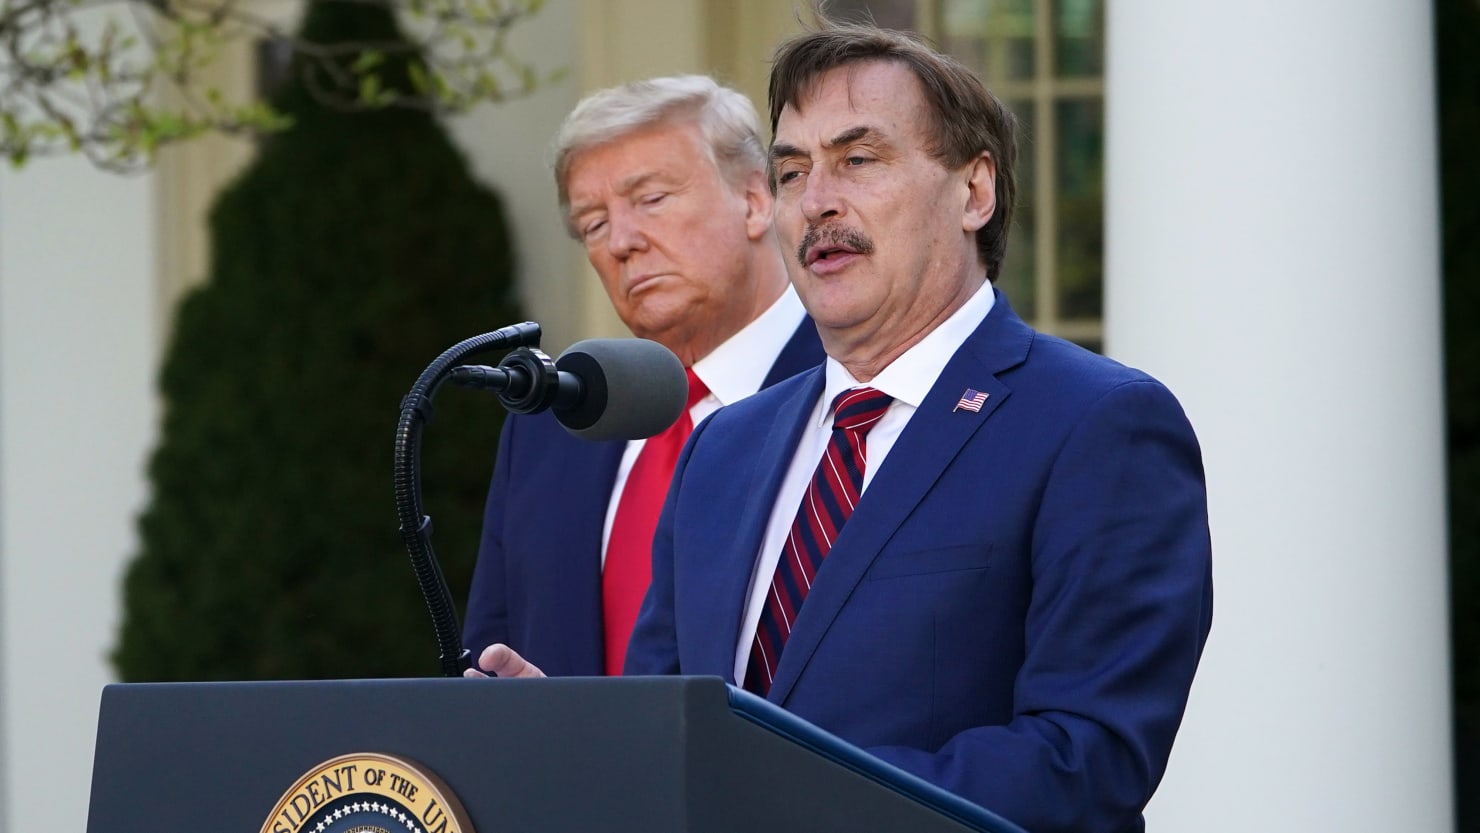 MyPillow CEO Mike Lindell hires Charles Harder to go to the Daily Mail for Jane Krakowski Affair Story